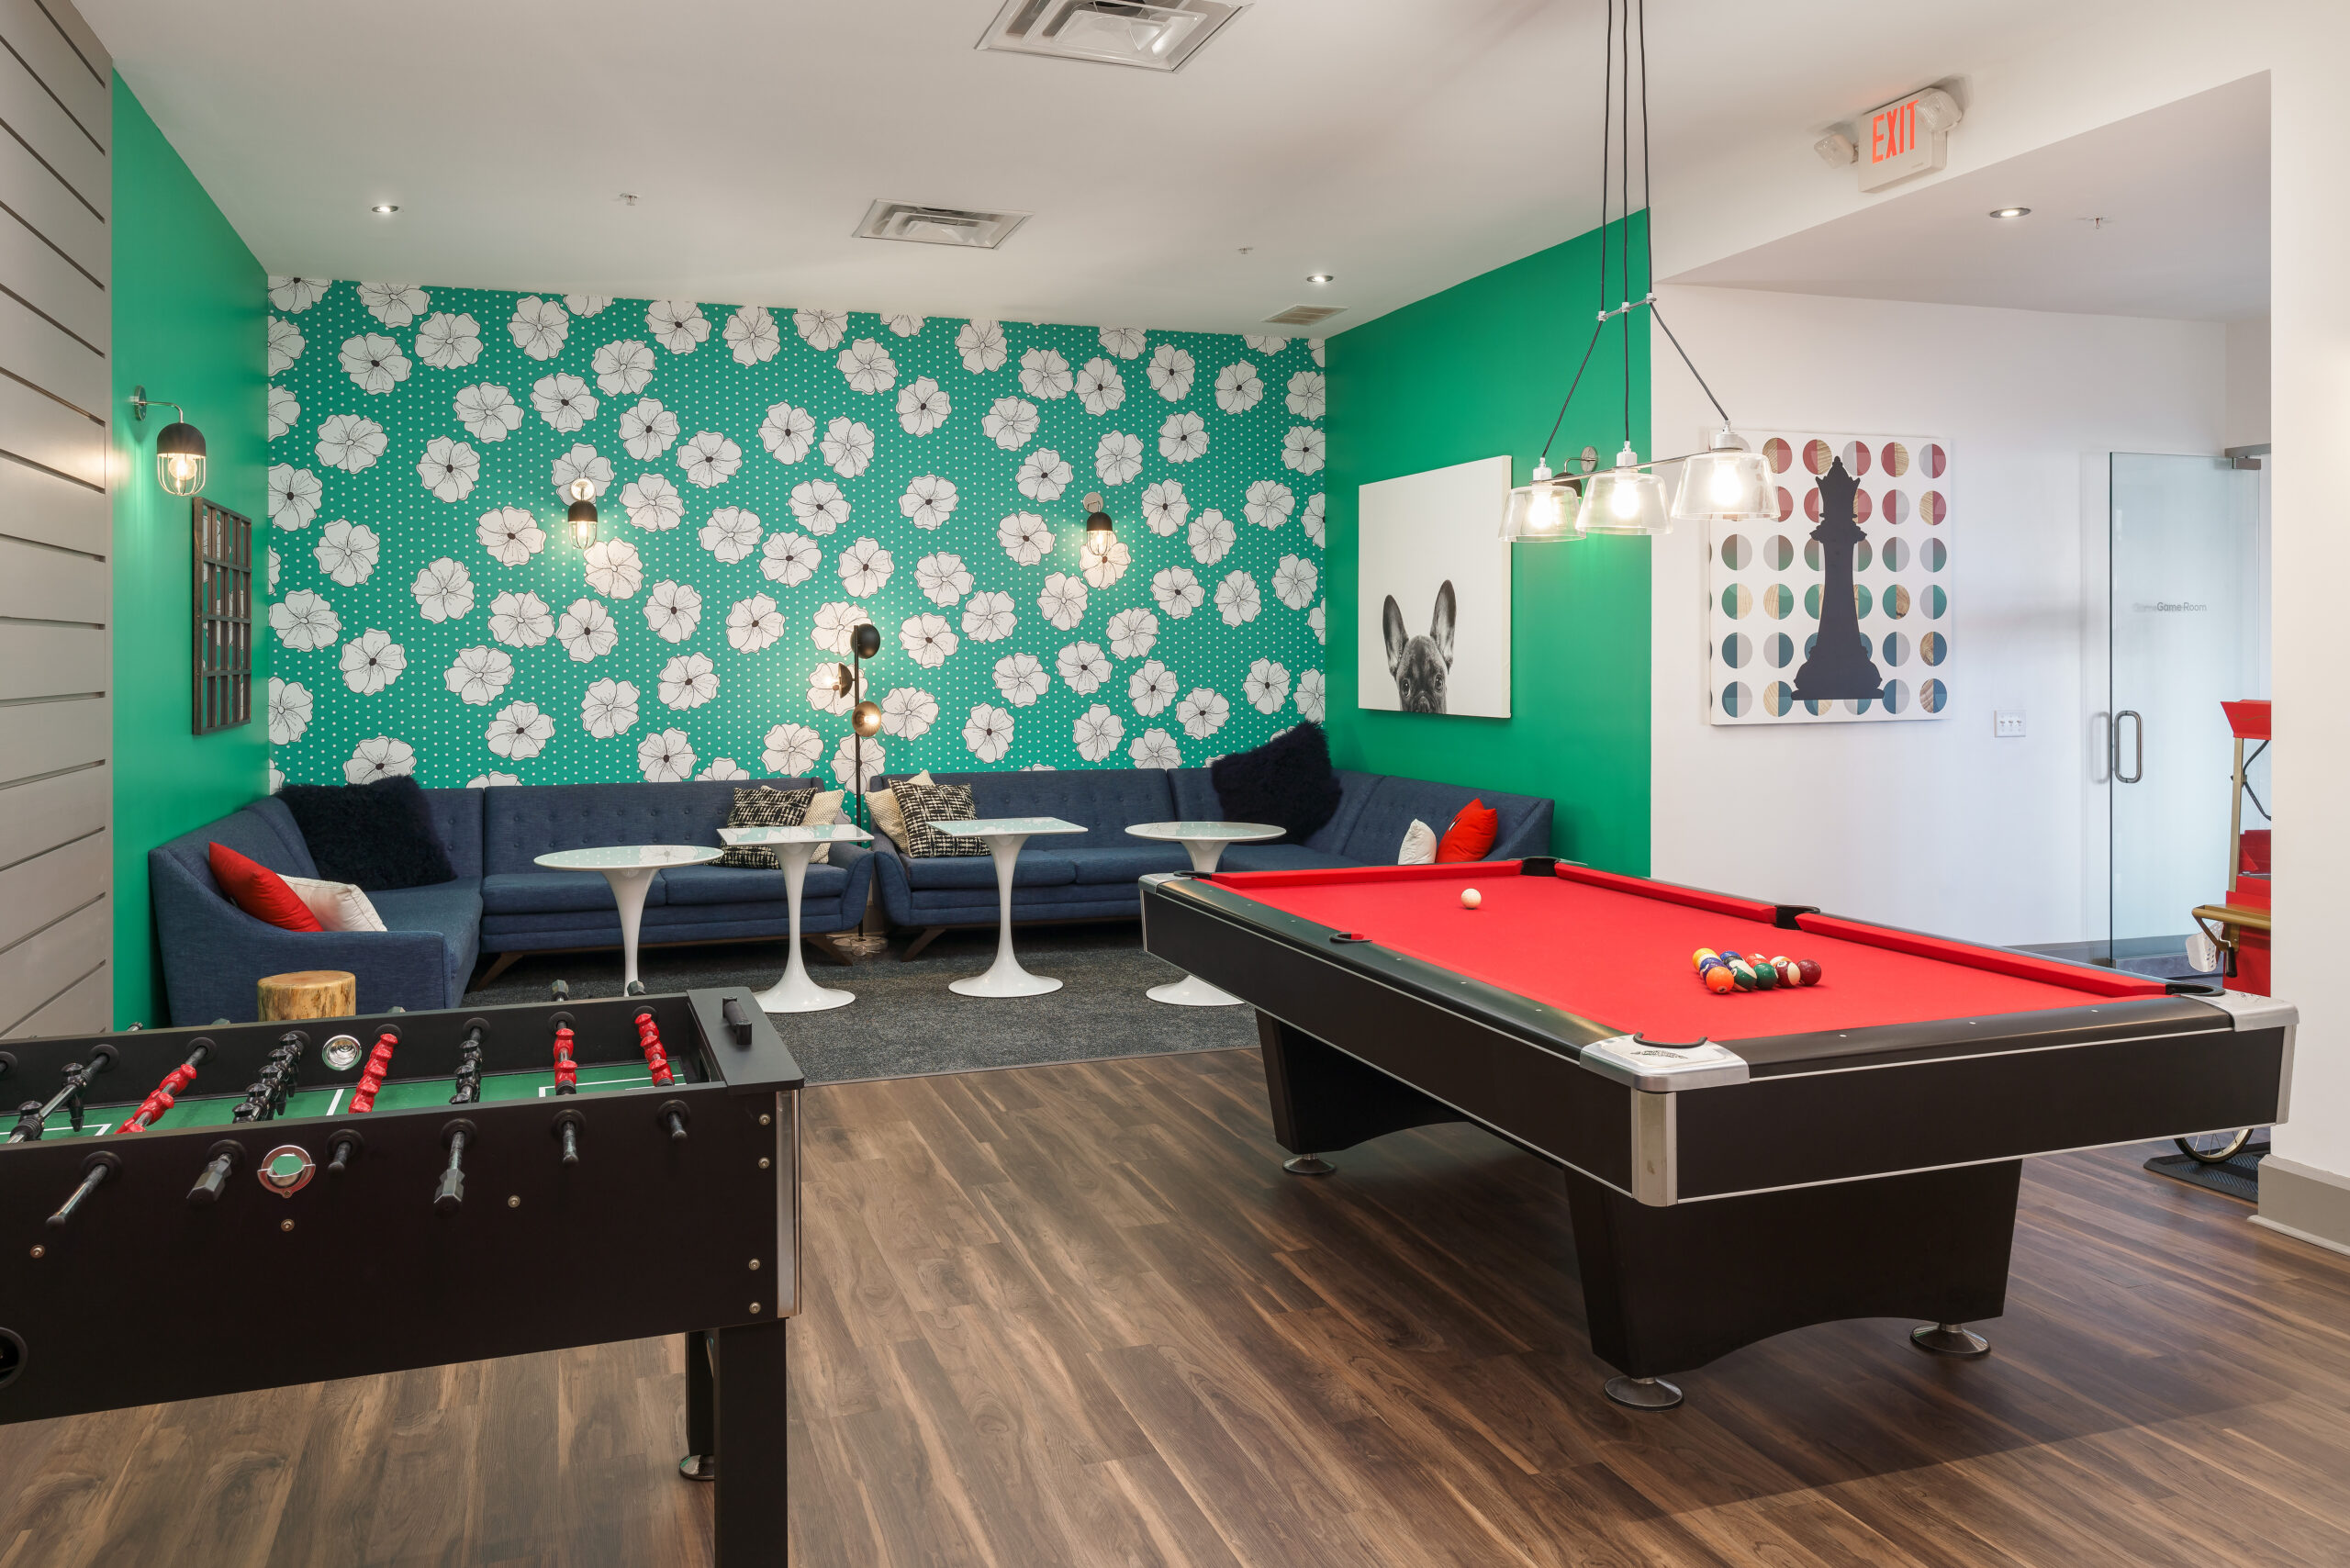 student clubhouse with pool table